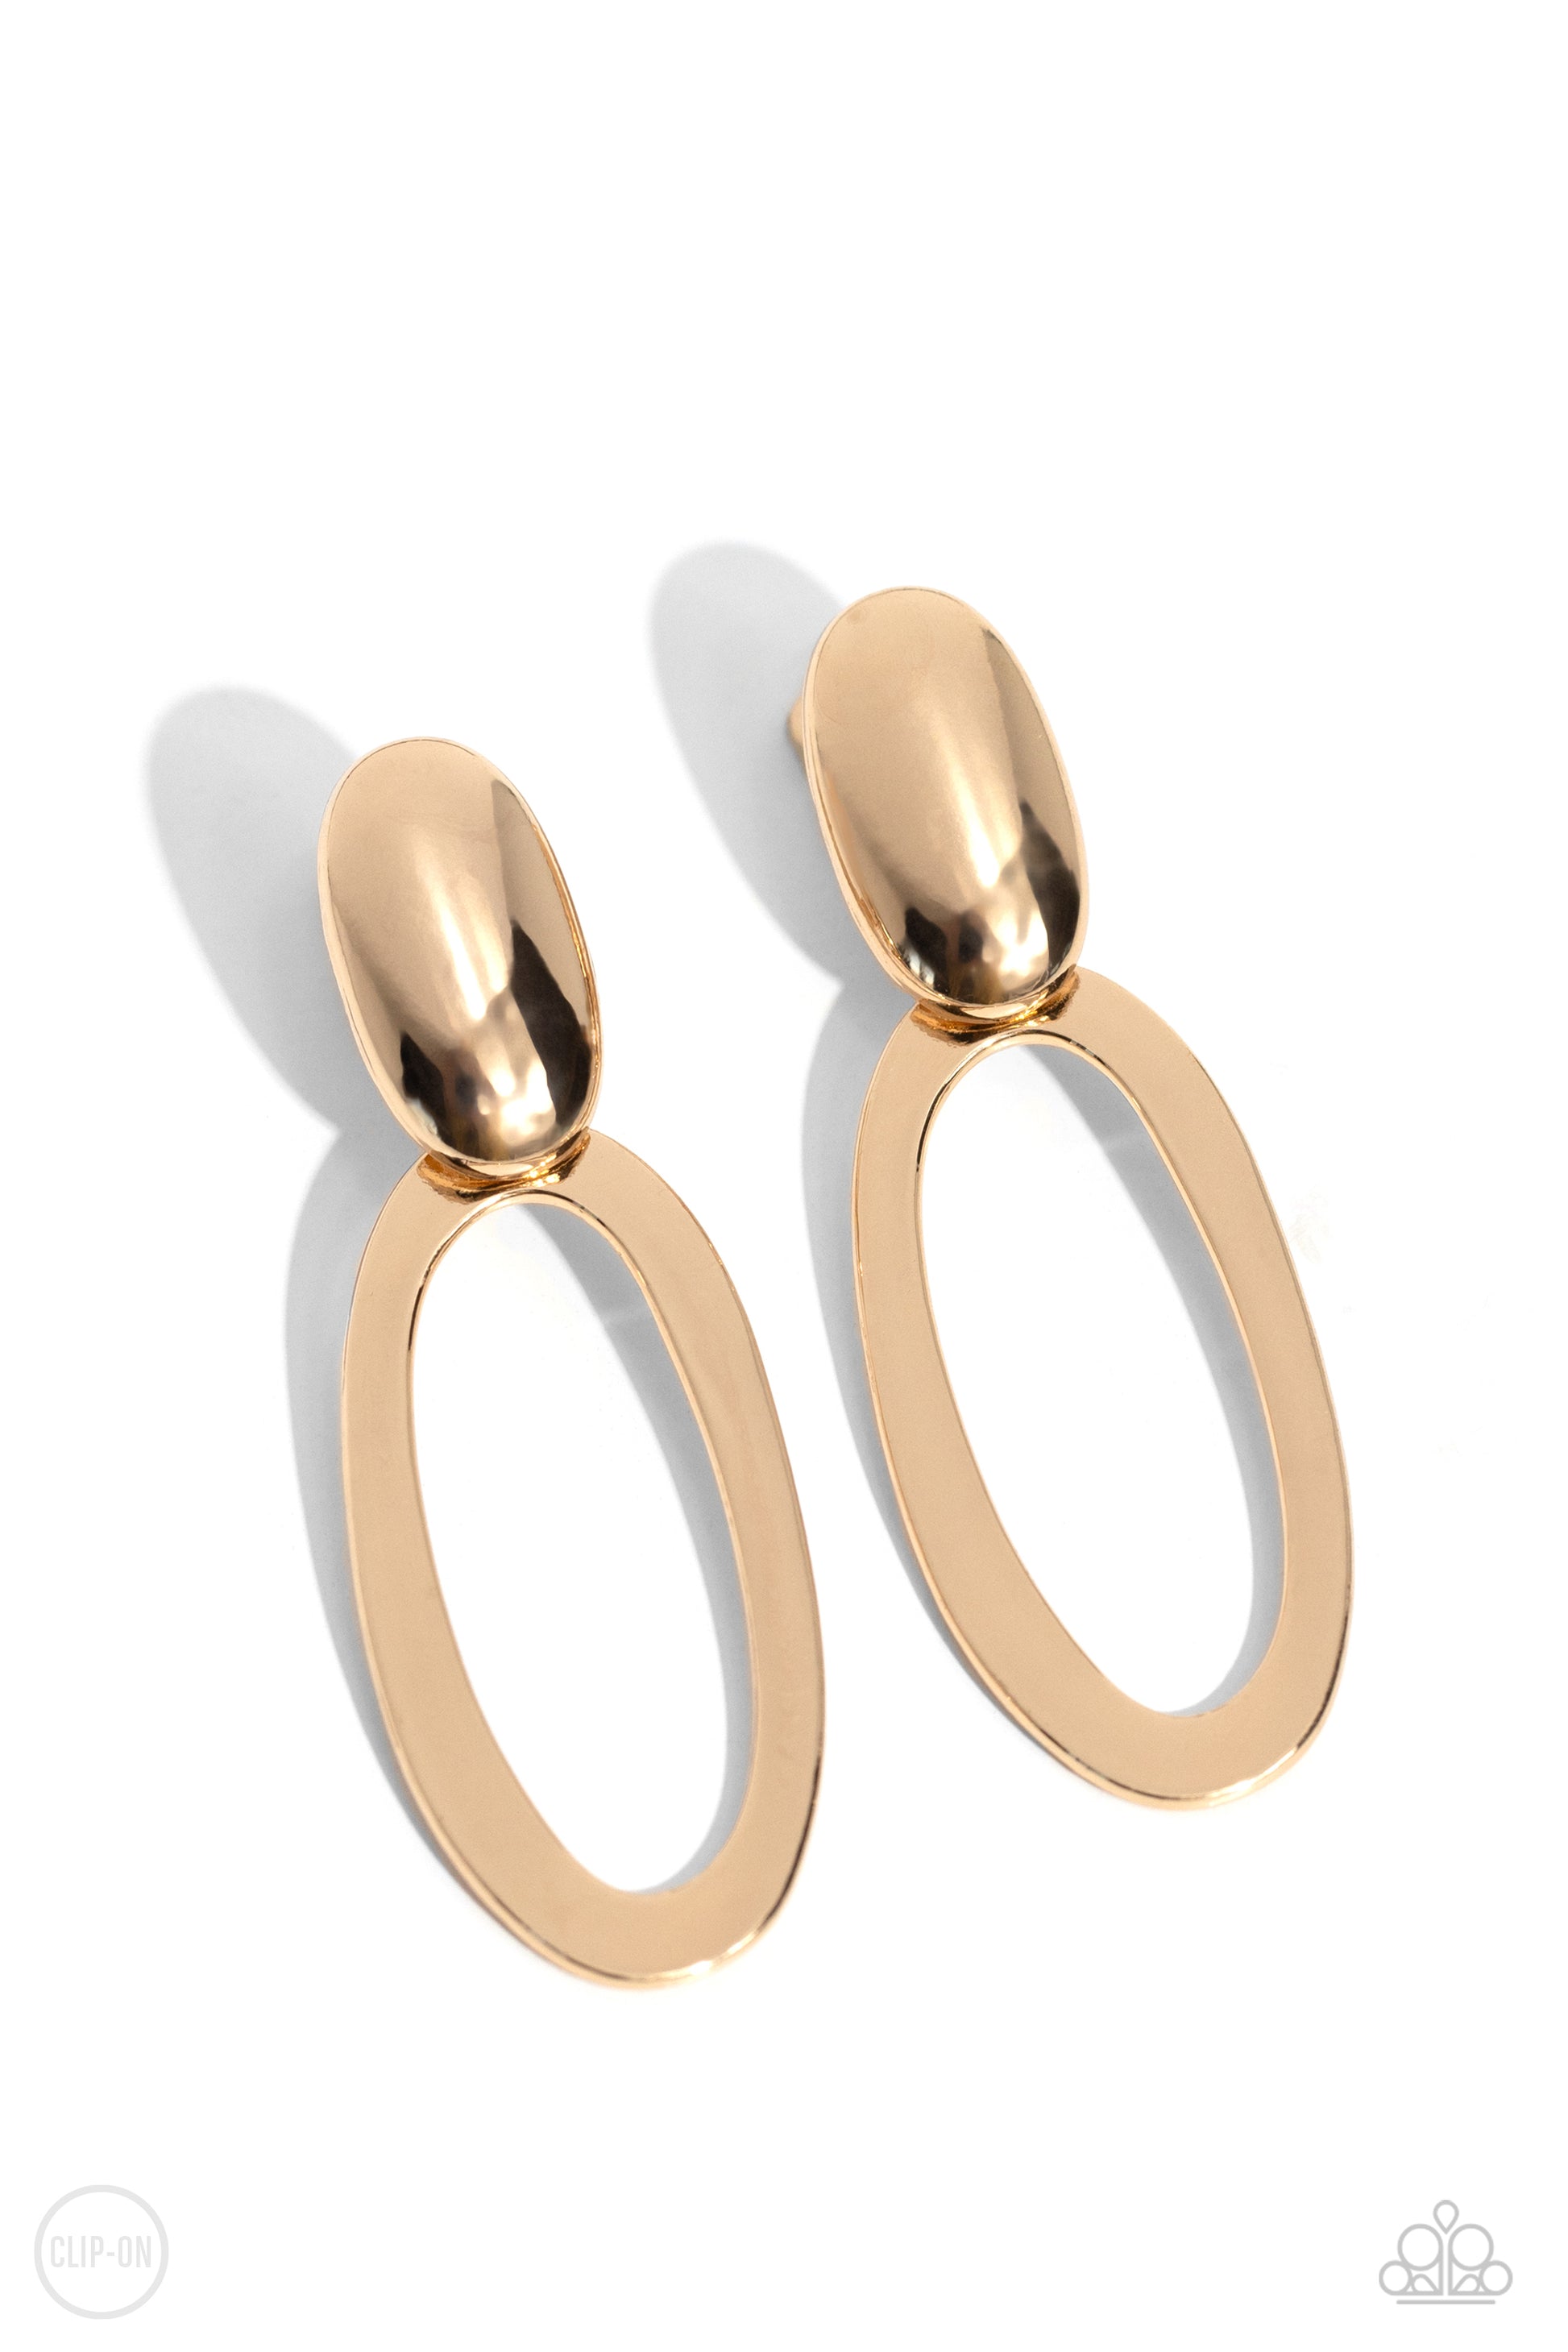 <p data-mce-fragment="1">Paparazzi Accessories - Pull OVAL! - Gold Clip-On Earrings asymmetrical gold oval hinges from the bottom of a spherical gold oval fitting, resulting in a radiant lure. Earring attaches to a standard clip-on fitting.</p> <p data-mce-fragment="1"><i data-mce-fragment="1">Sold as one pair of clip-on earrings.</i></p>